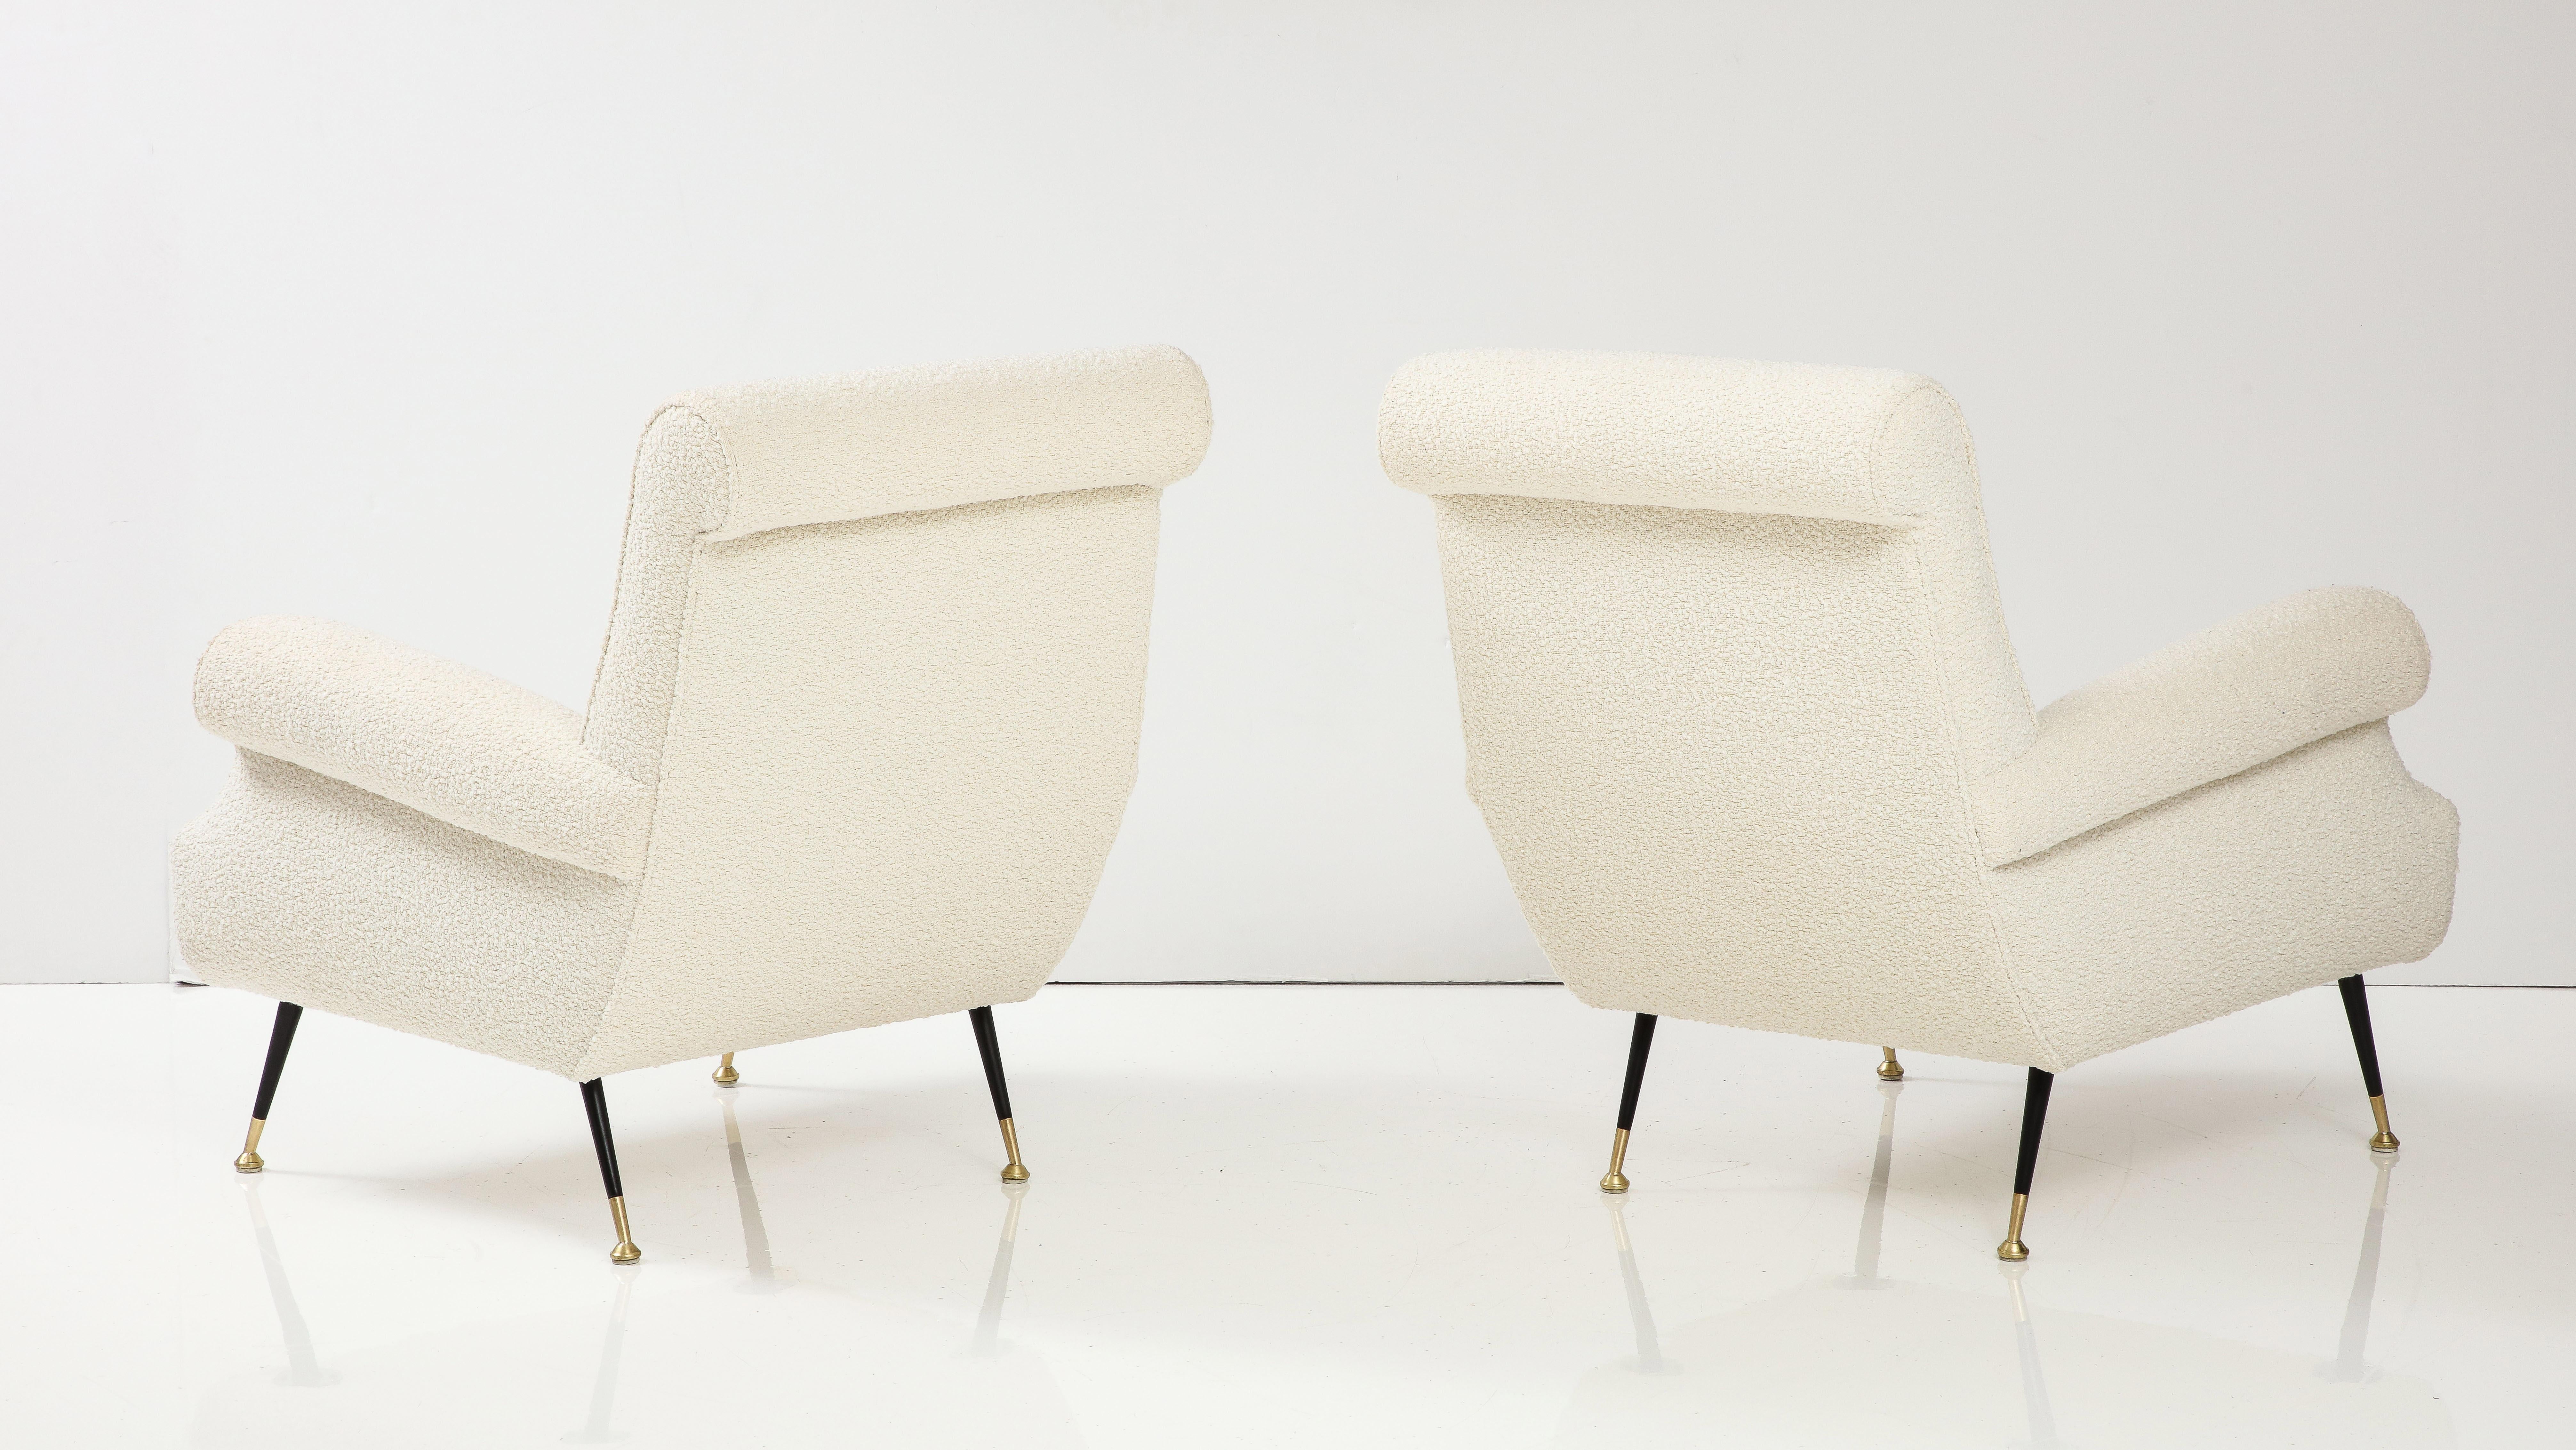 Pair of Italian Modernist Lounge Chairs, Italy, circa 1950 For Sale 2